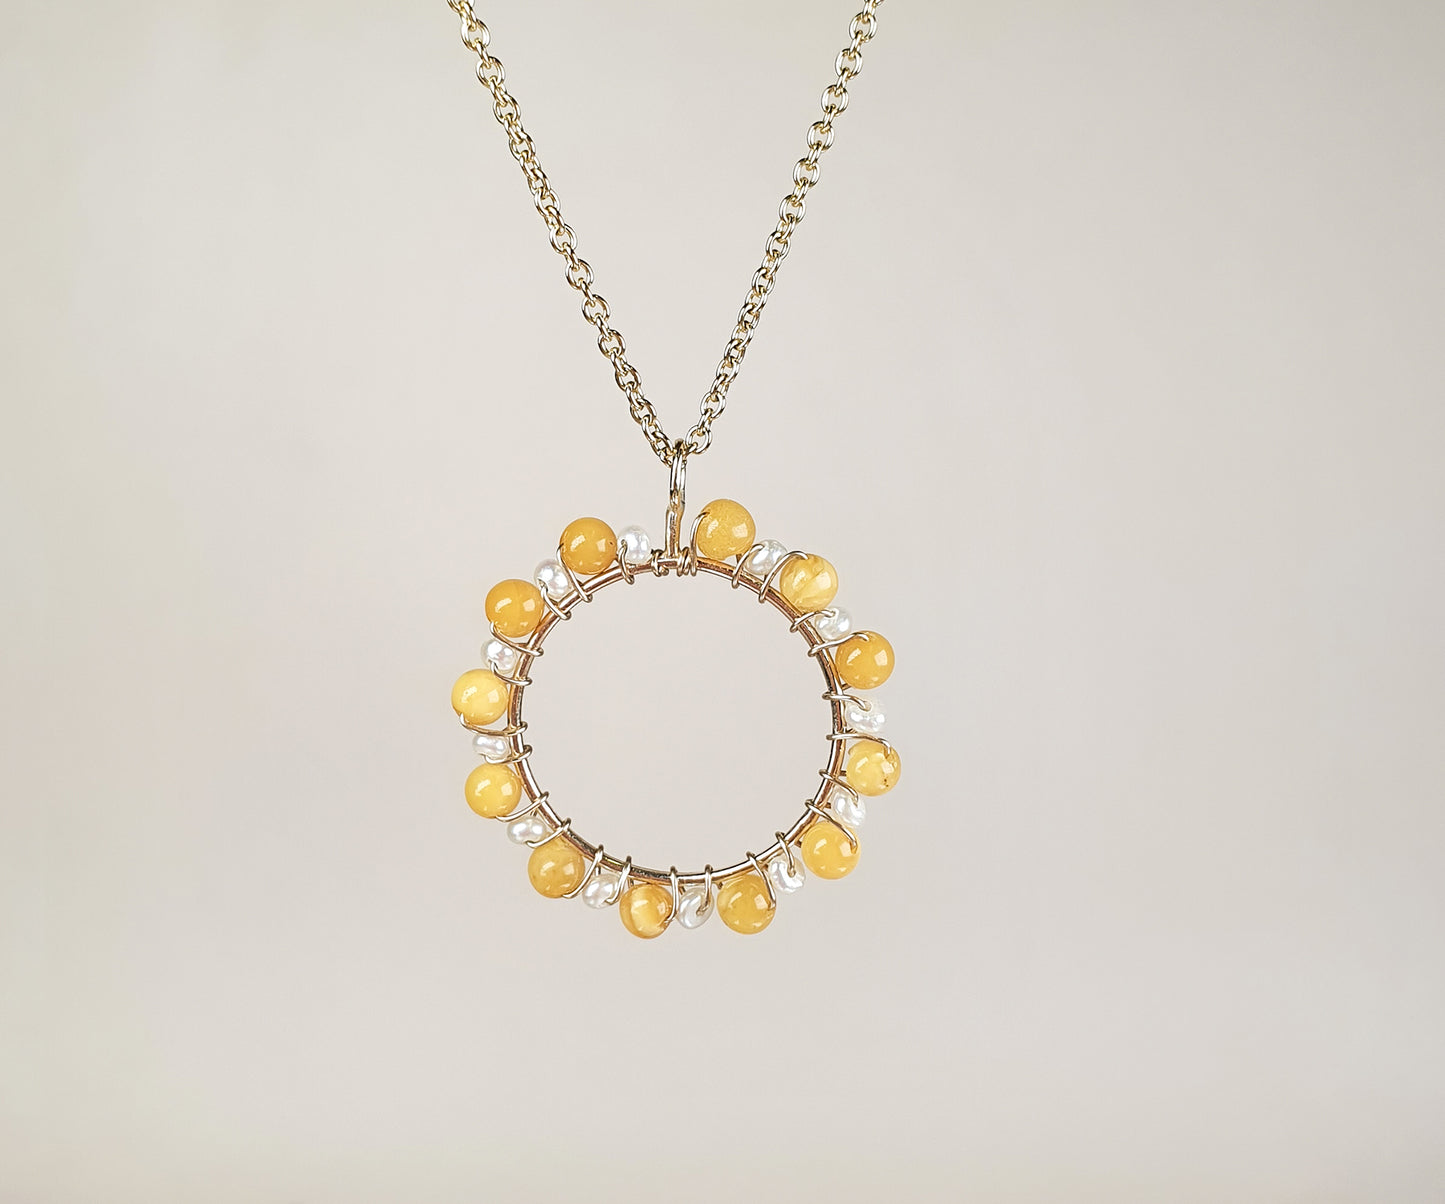 Merry-Go-Round Aga Necklace with Seed Pearls and Amber.